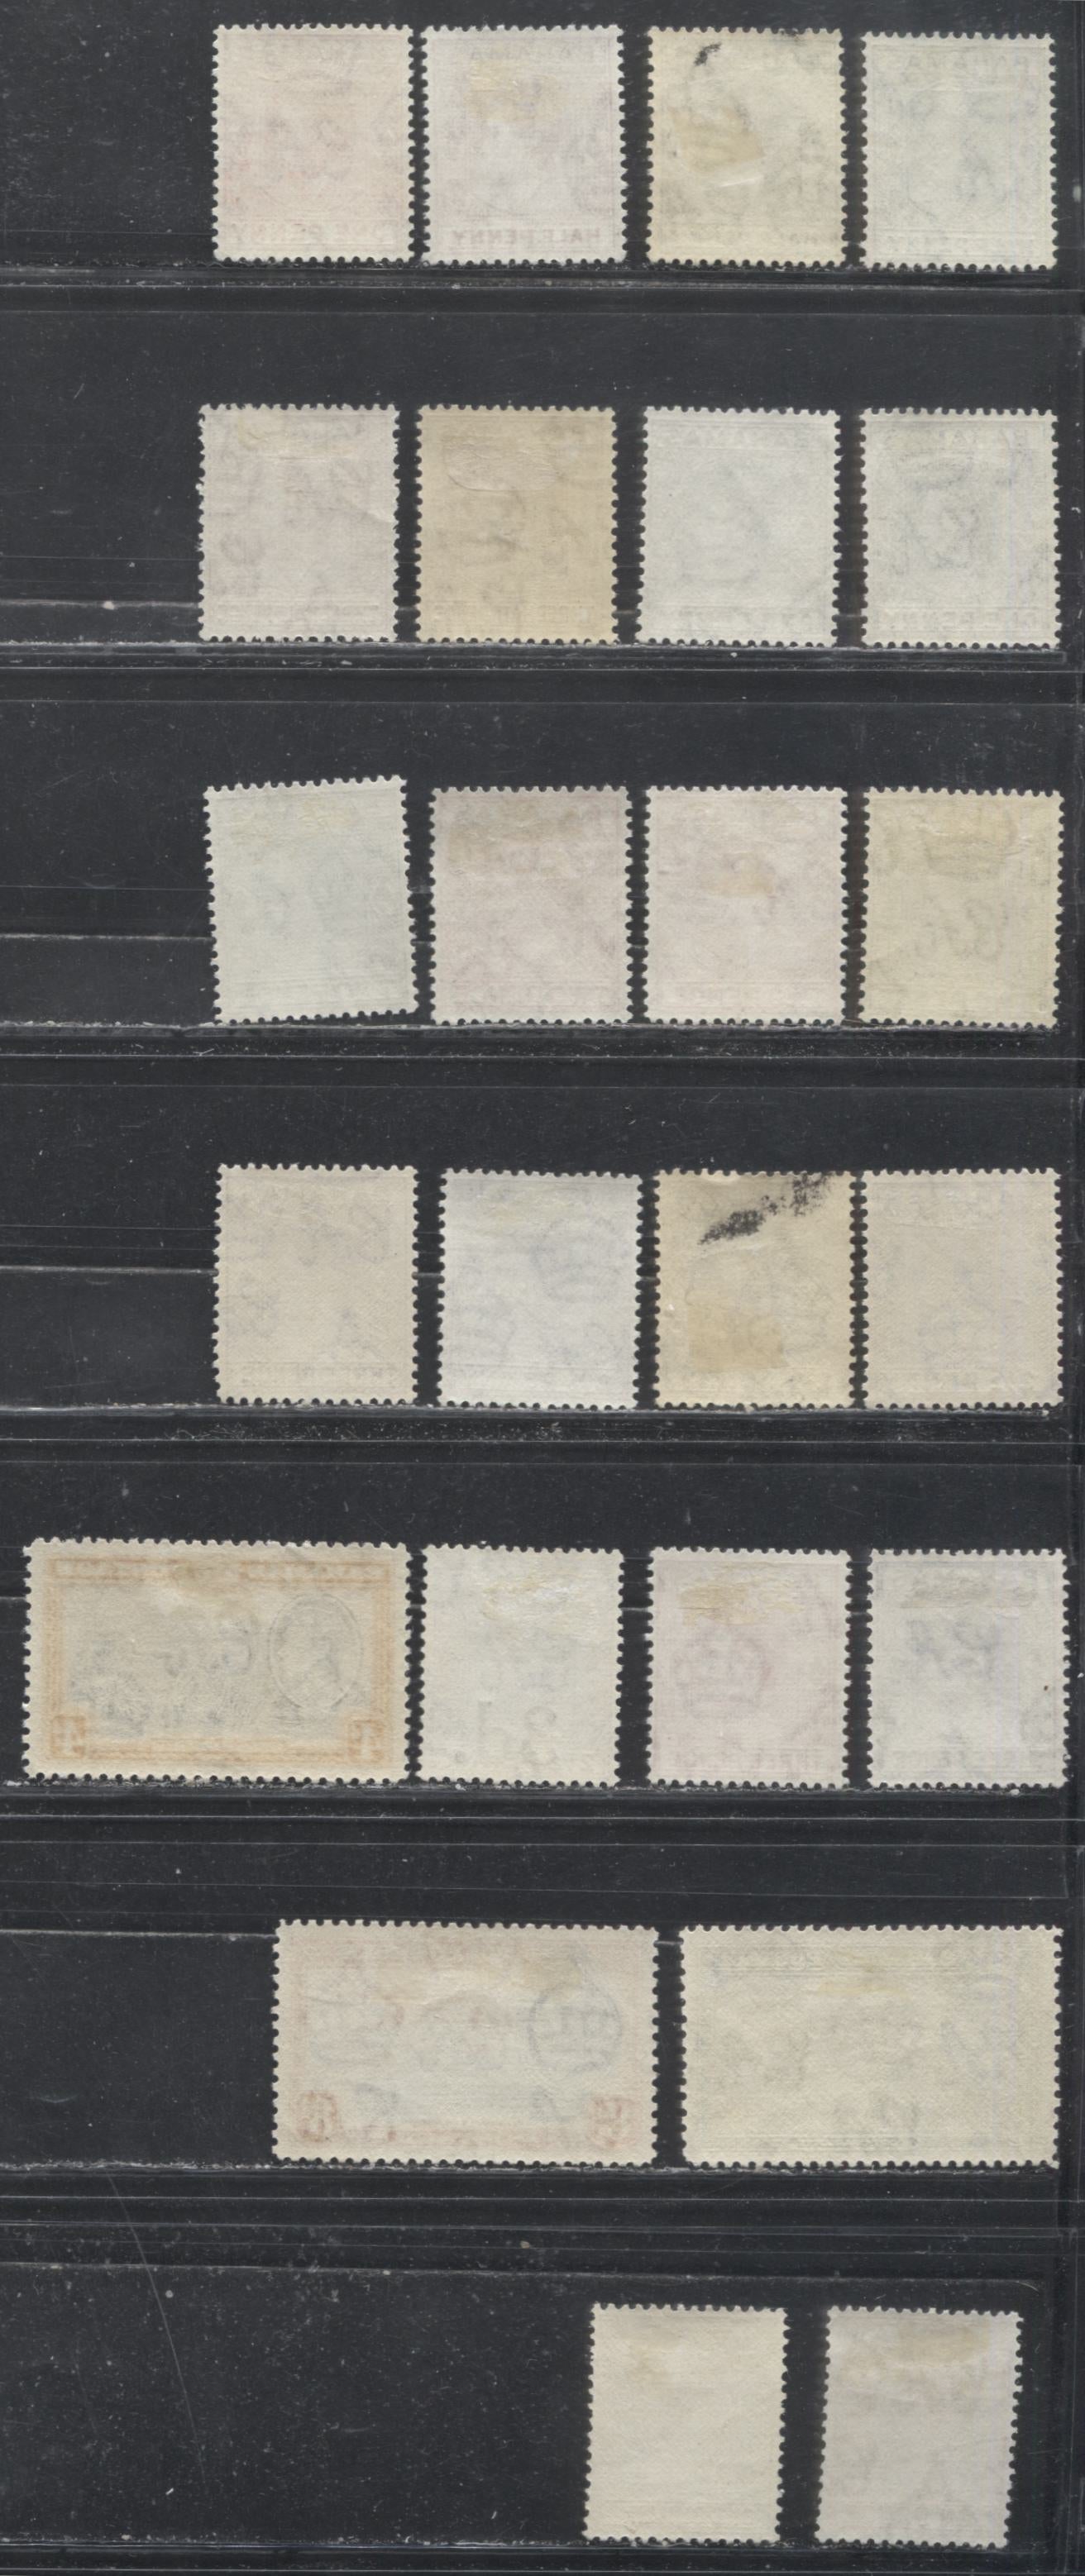 Bahamas SG#149-155b, 158-161 1938-1952 Pictorial Definitive Issue, a VF LH Complete Short Set to the 1/- With Additional Printings and Most Listed Shades